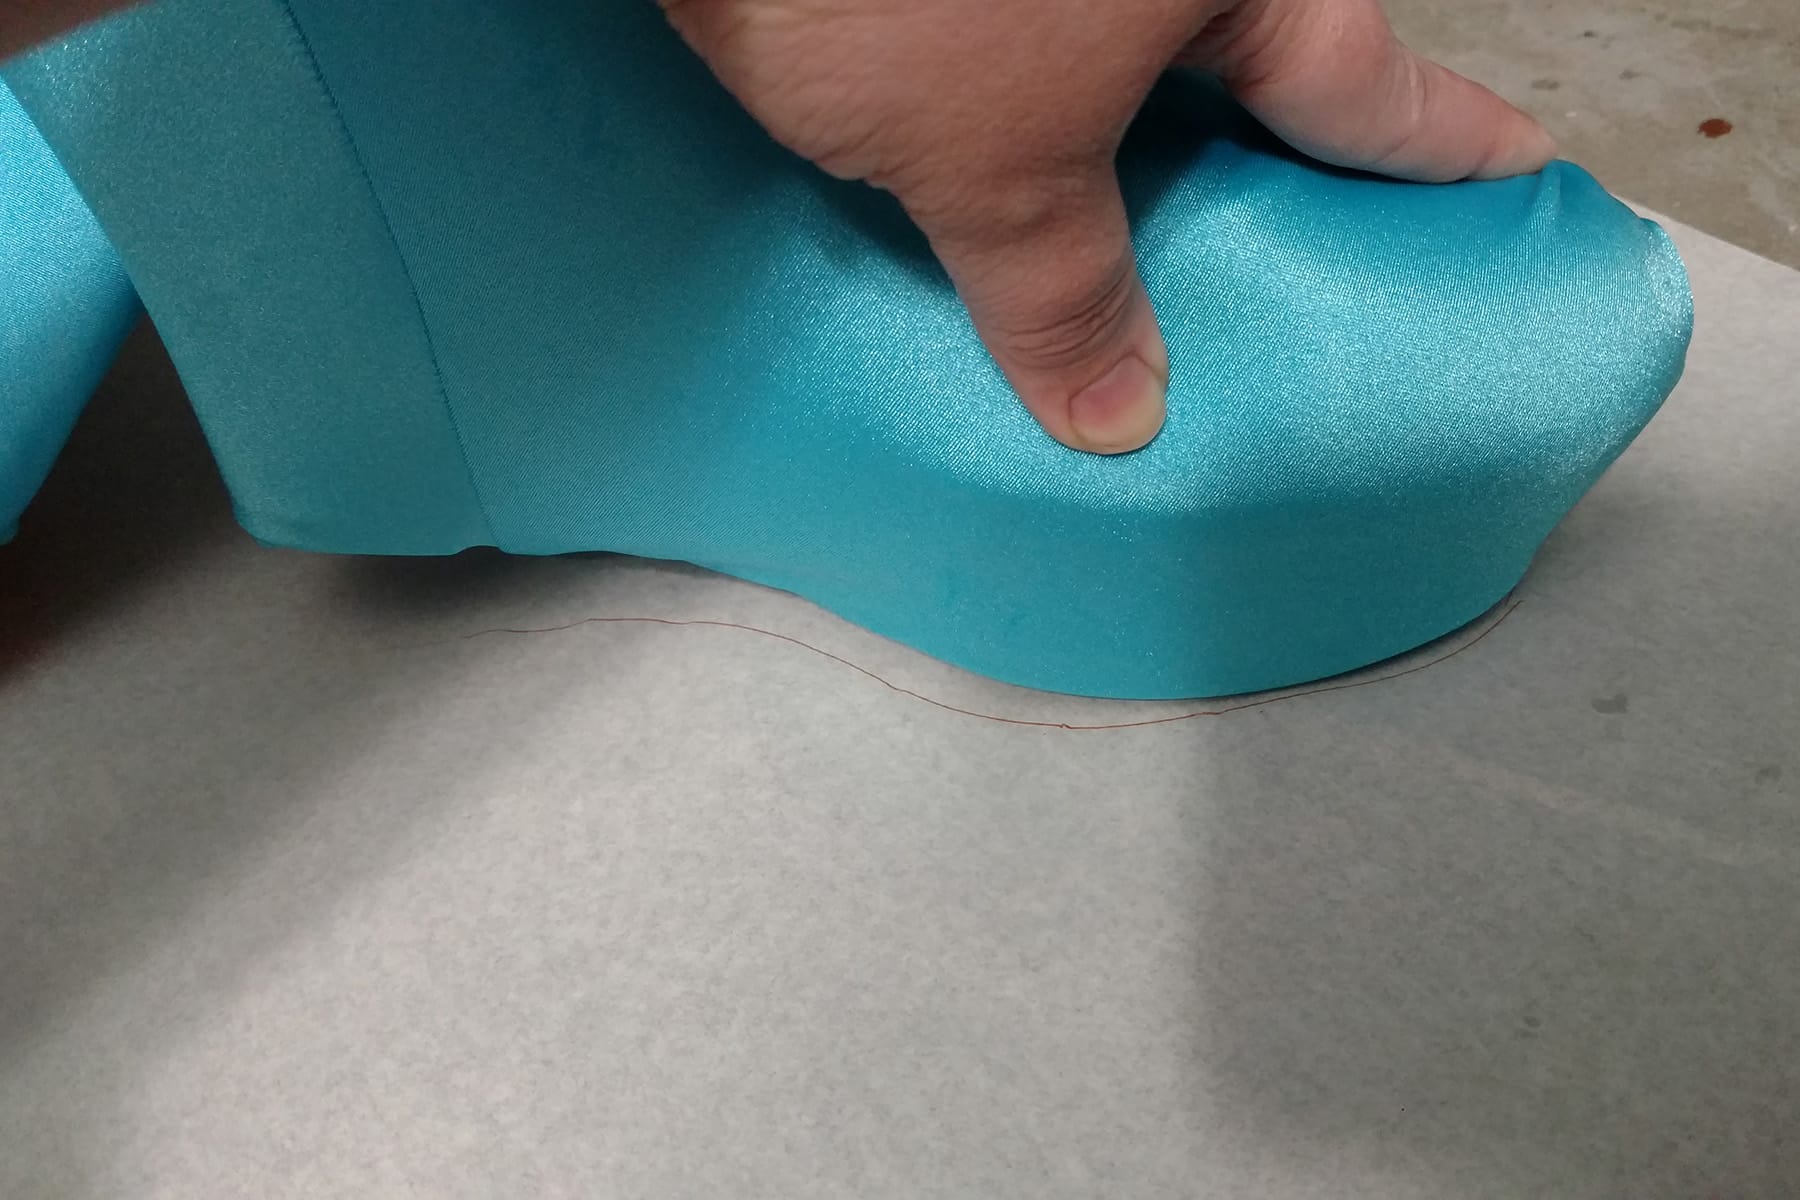 A hand holds a blue, spandex covered shoe flat on a piece of paper.